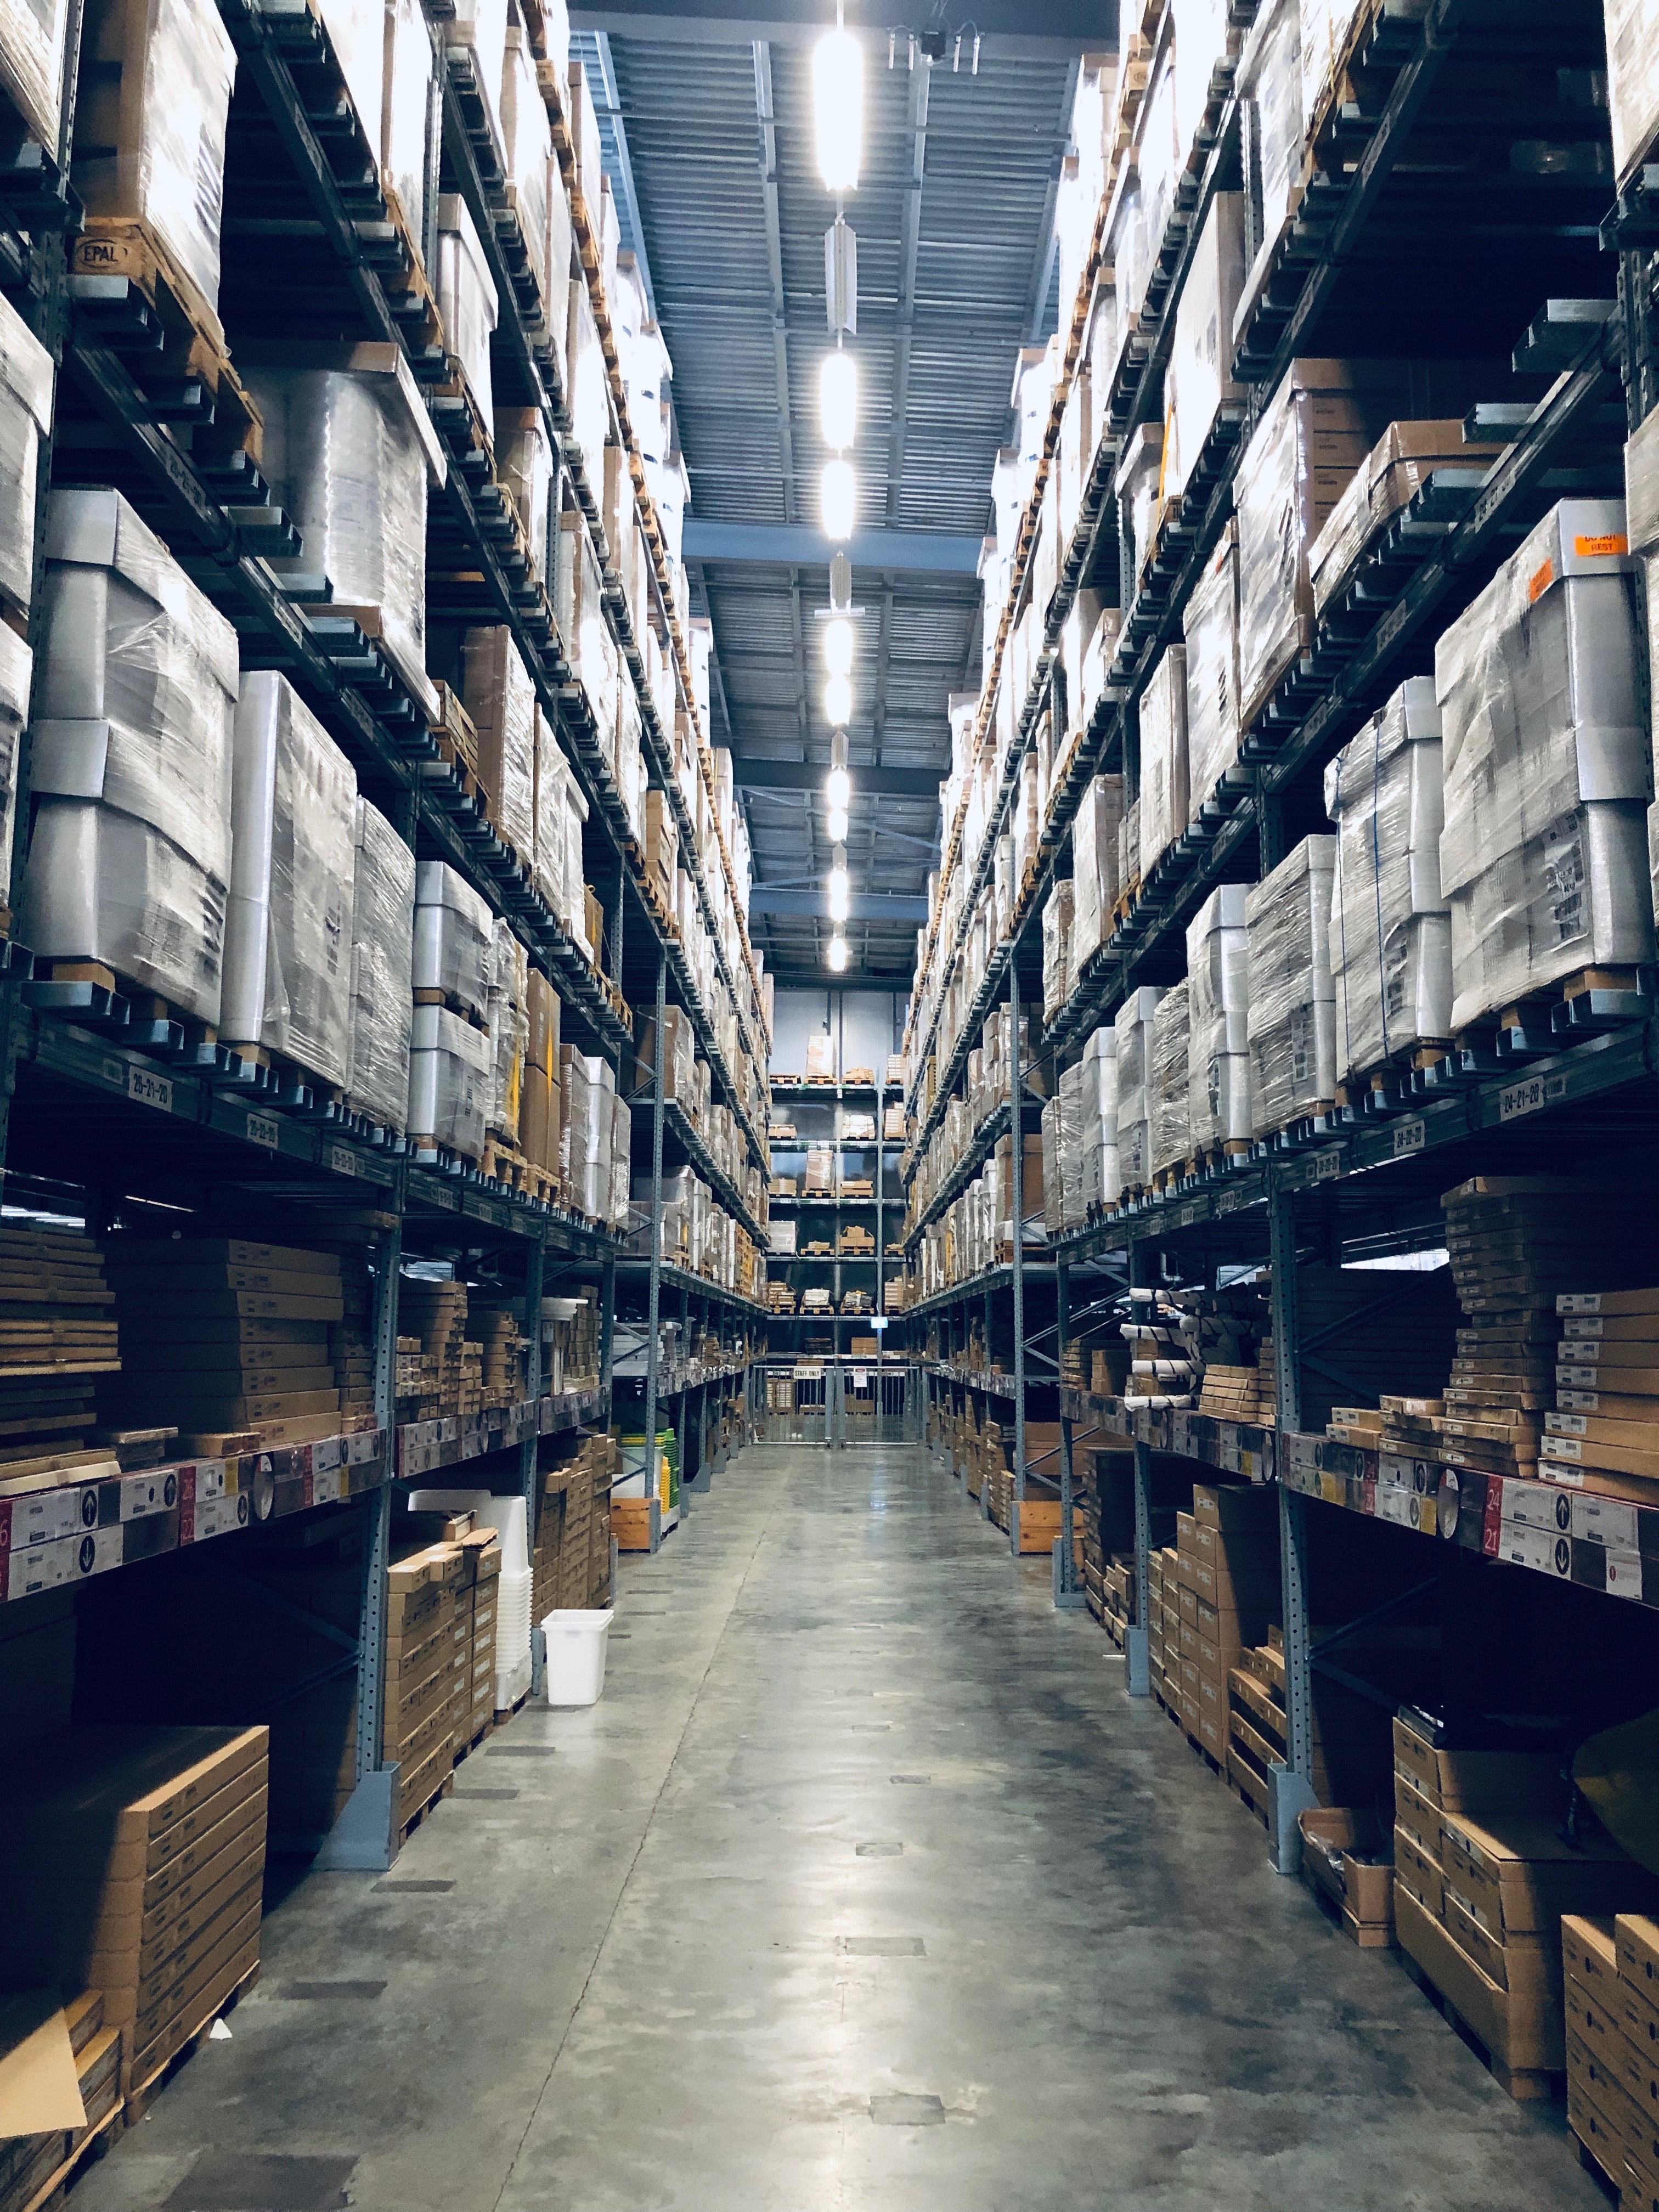 IoT and supply chains: storage and manufacturing